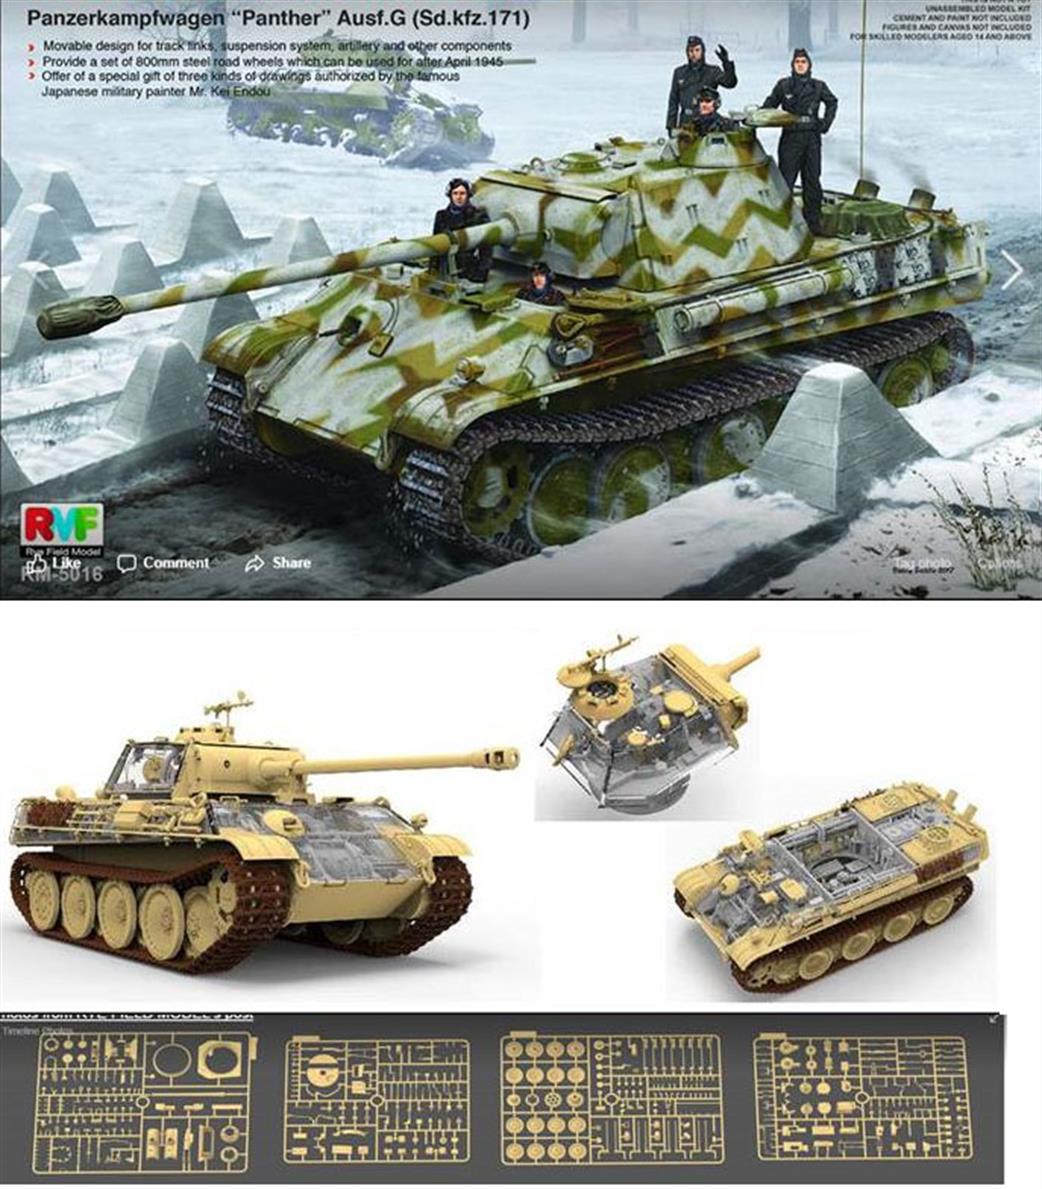 Rye Field Model 1/35 RM-5016 Panther Ausf.G with Full Interior Tank Kit